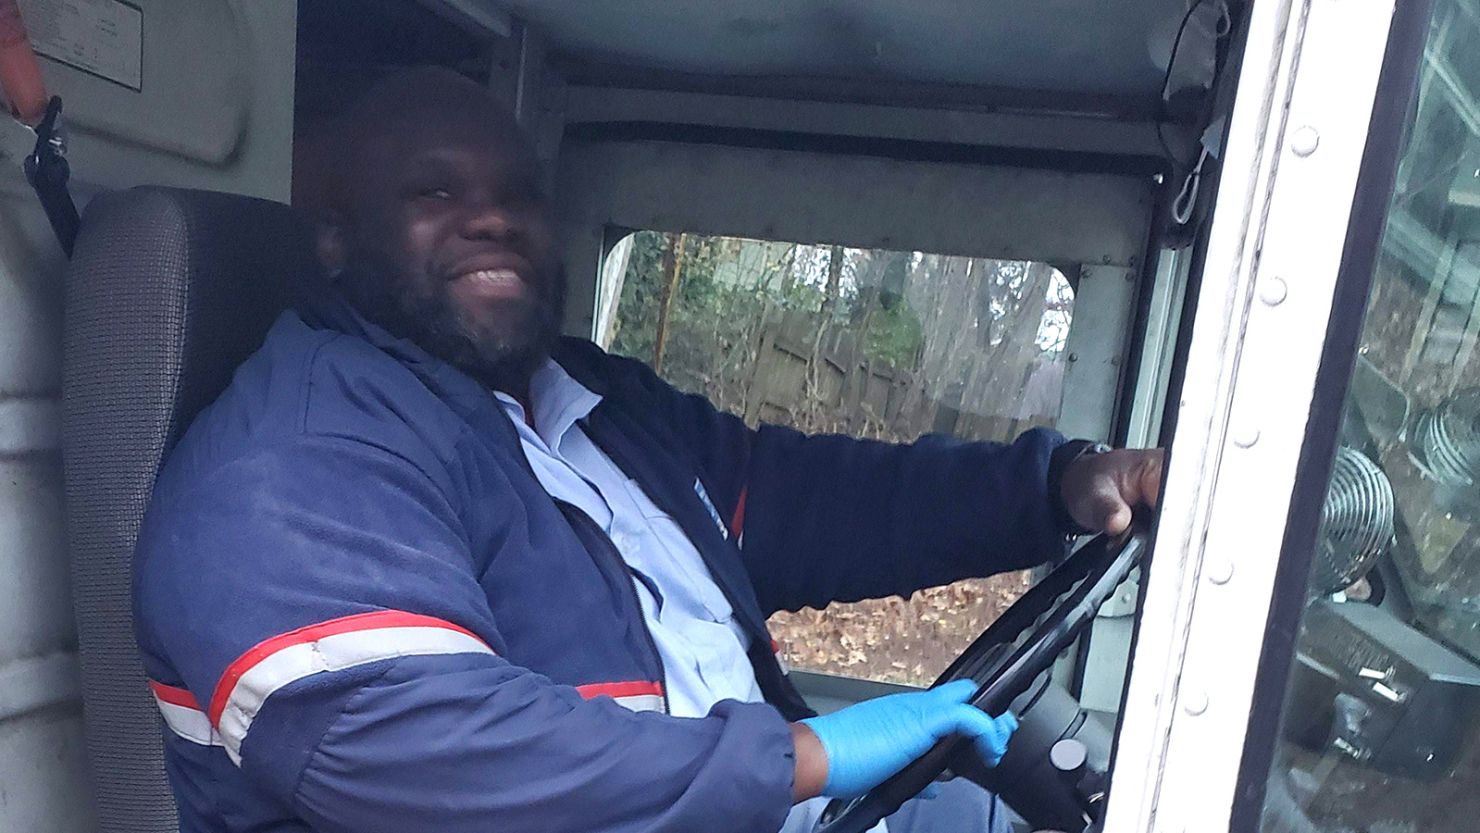 Mail carrier Adam Finley plays Tic-tac-toe with kids on his route.